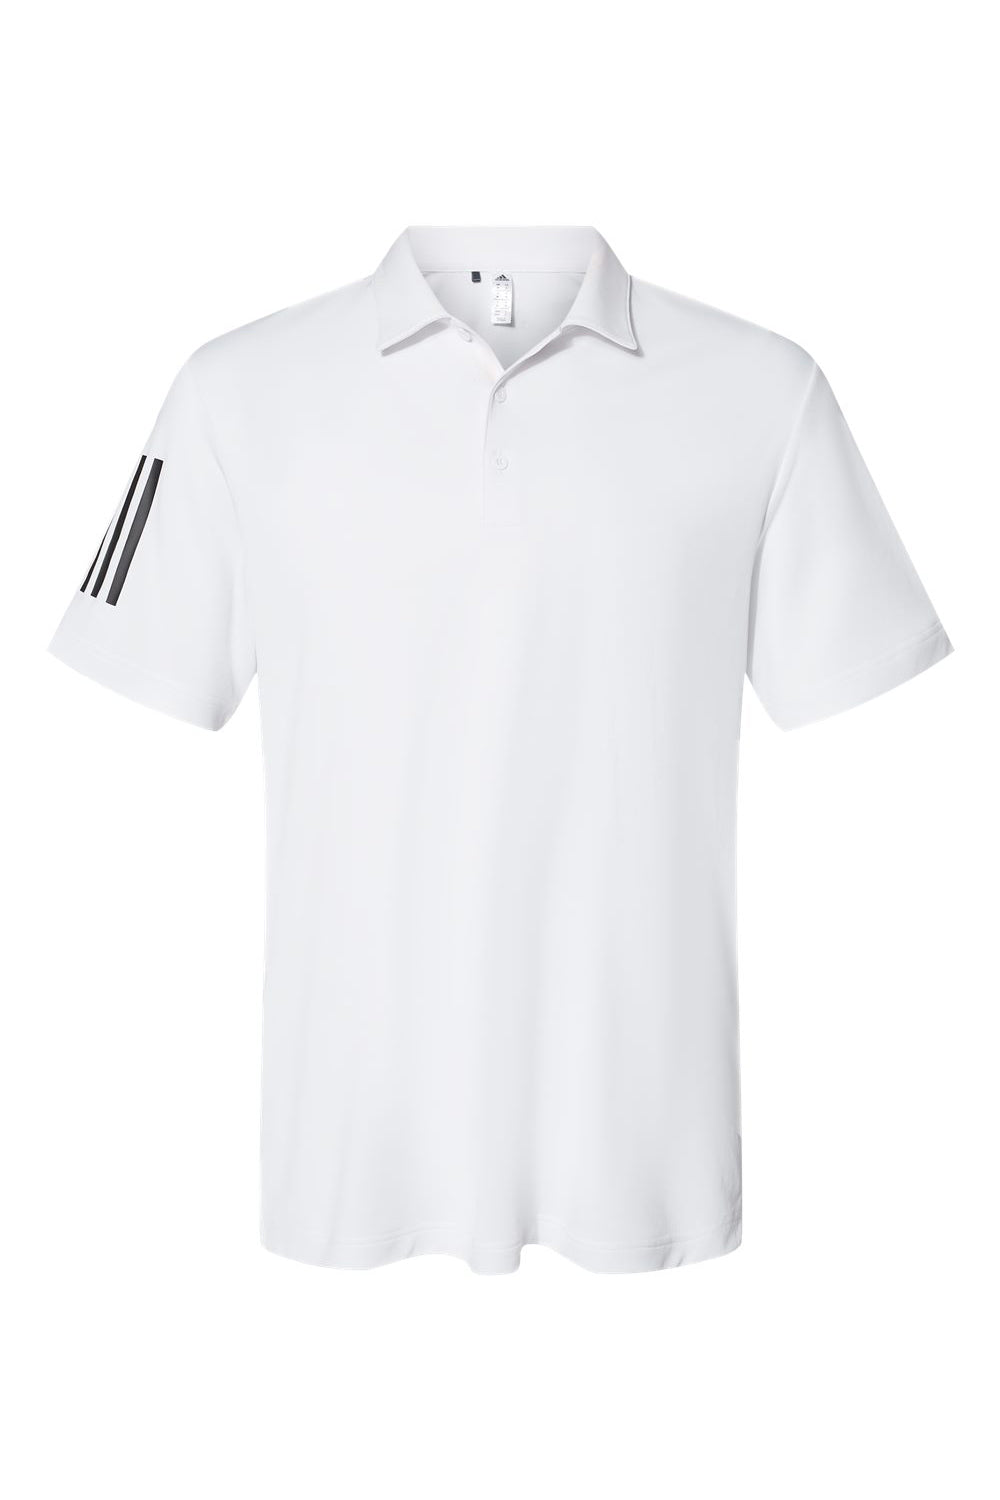 Adidas A480 Mens Floating 3 Stripes Polo Shirt White/Black Flat Front